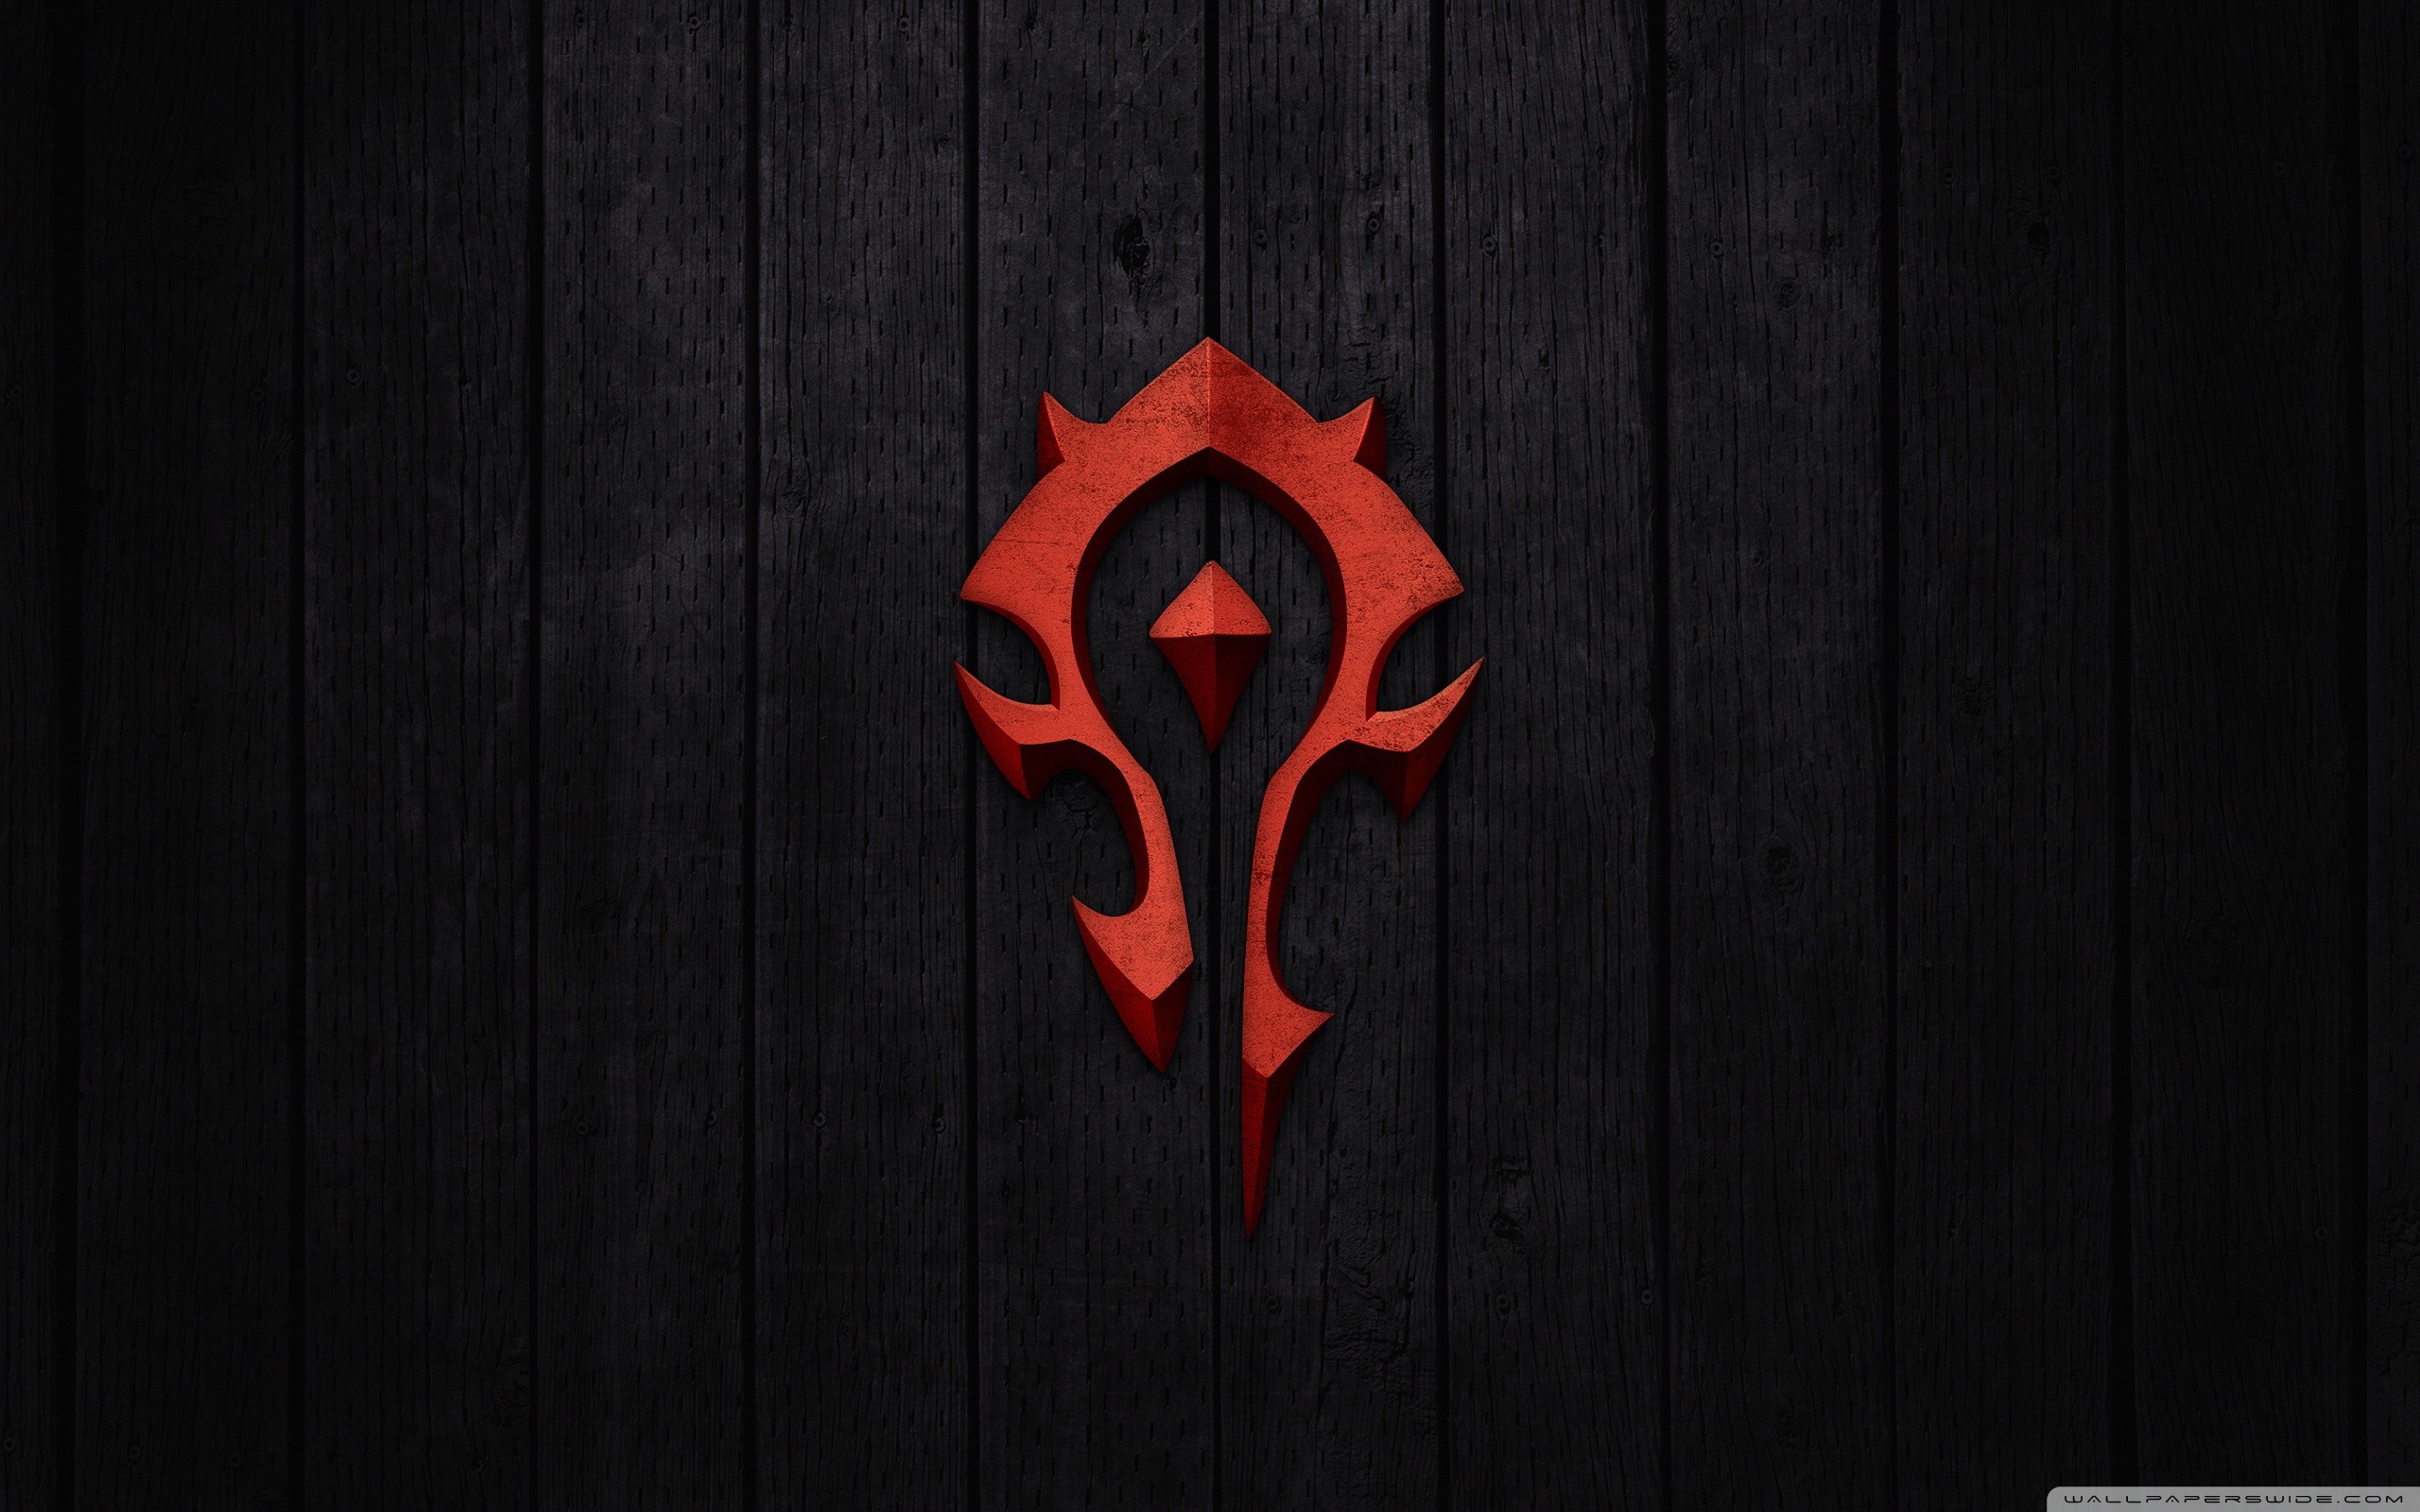 World of Warcraft – Horde Sign HD Wide Wallpaper for Widescreen